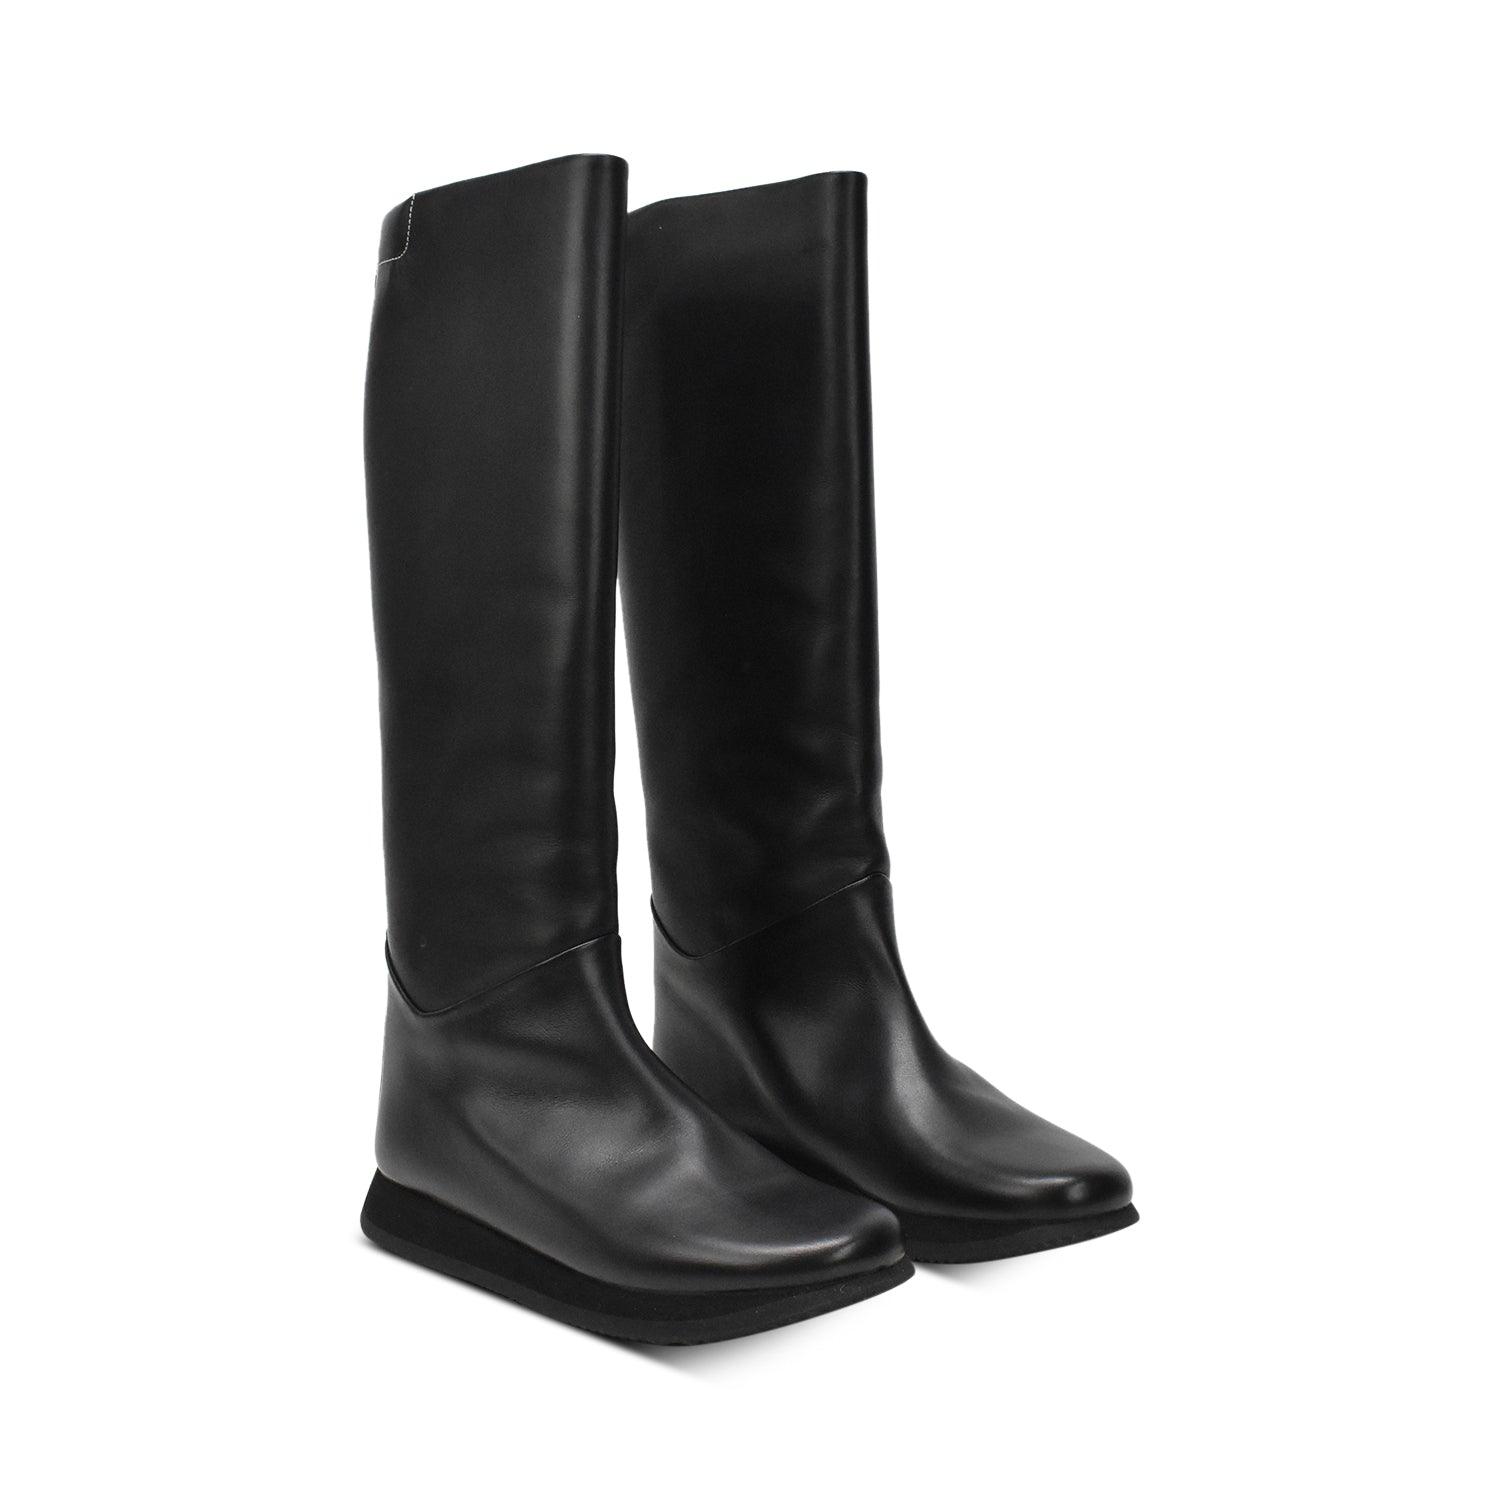 Hermes Boots - Women's 36 - Fashionably Yours